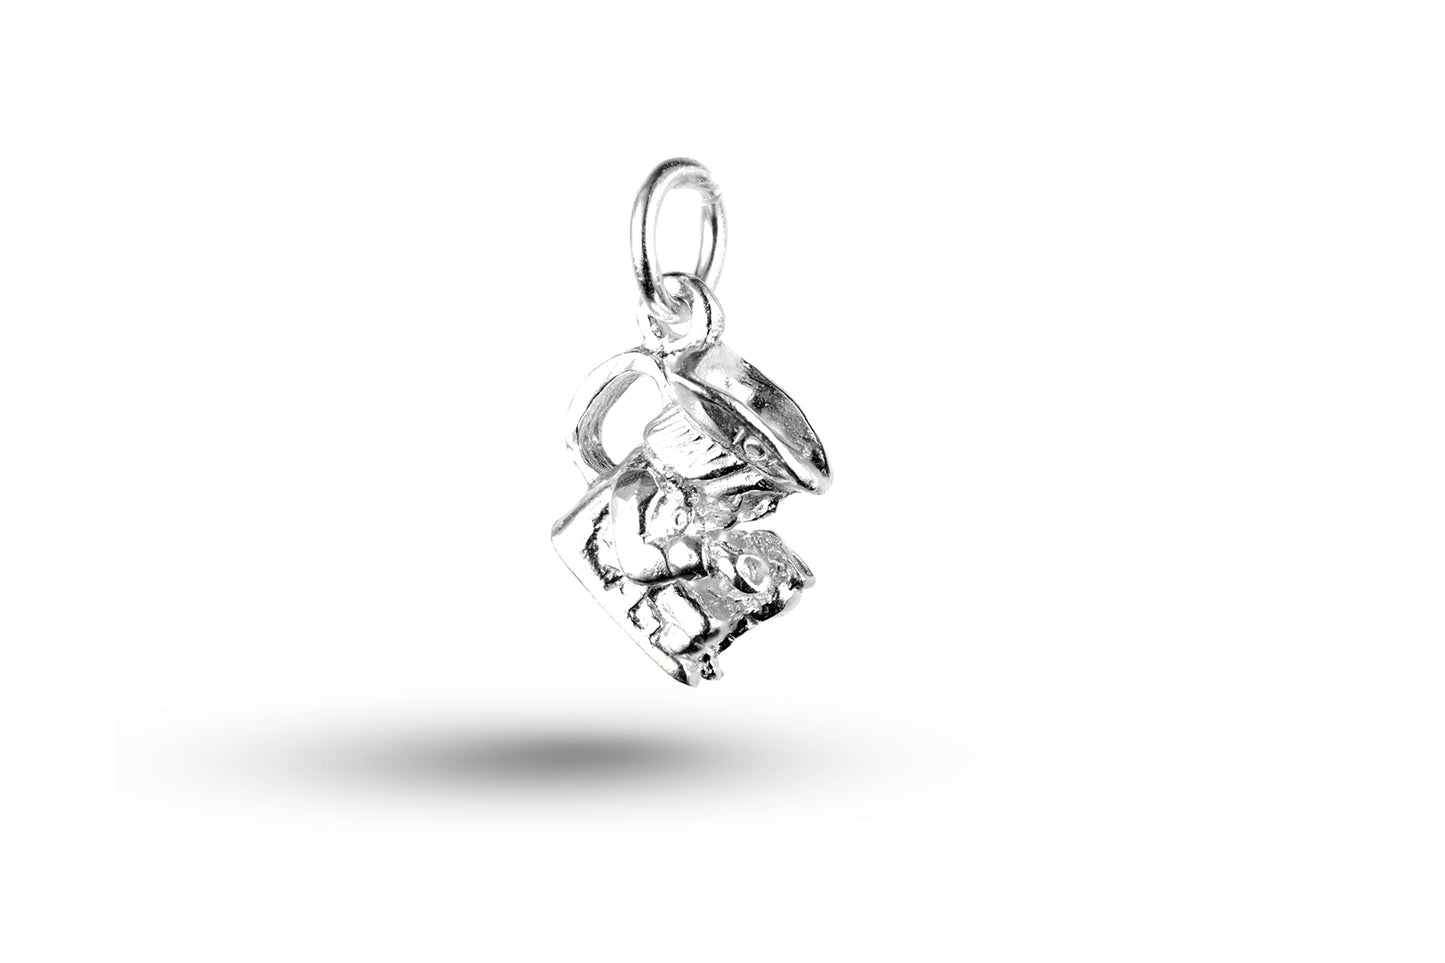 White gold Toby Jug charm.